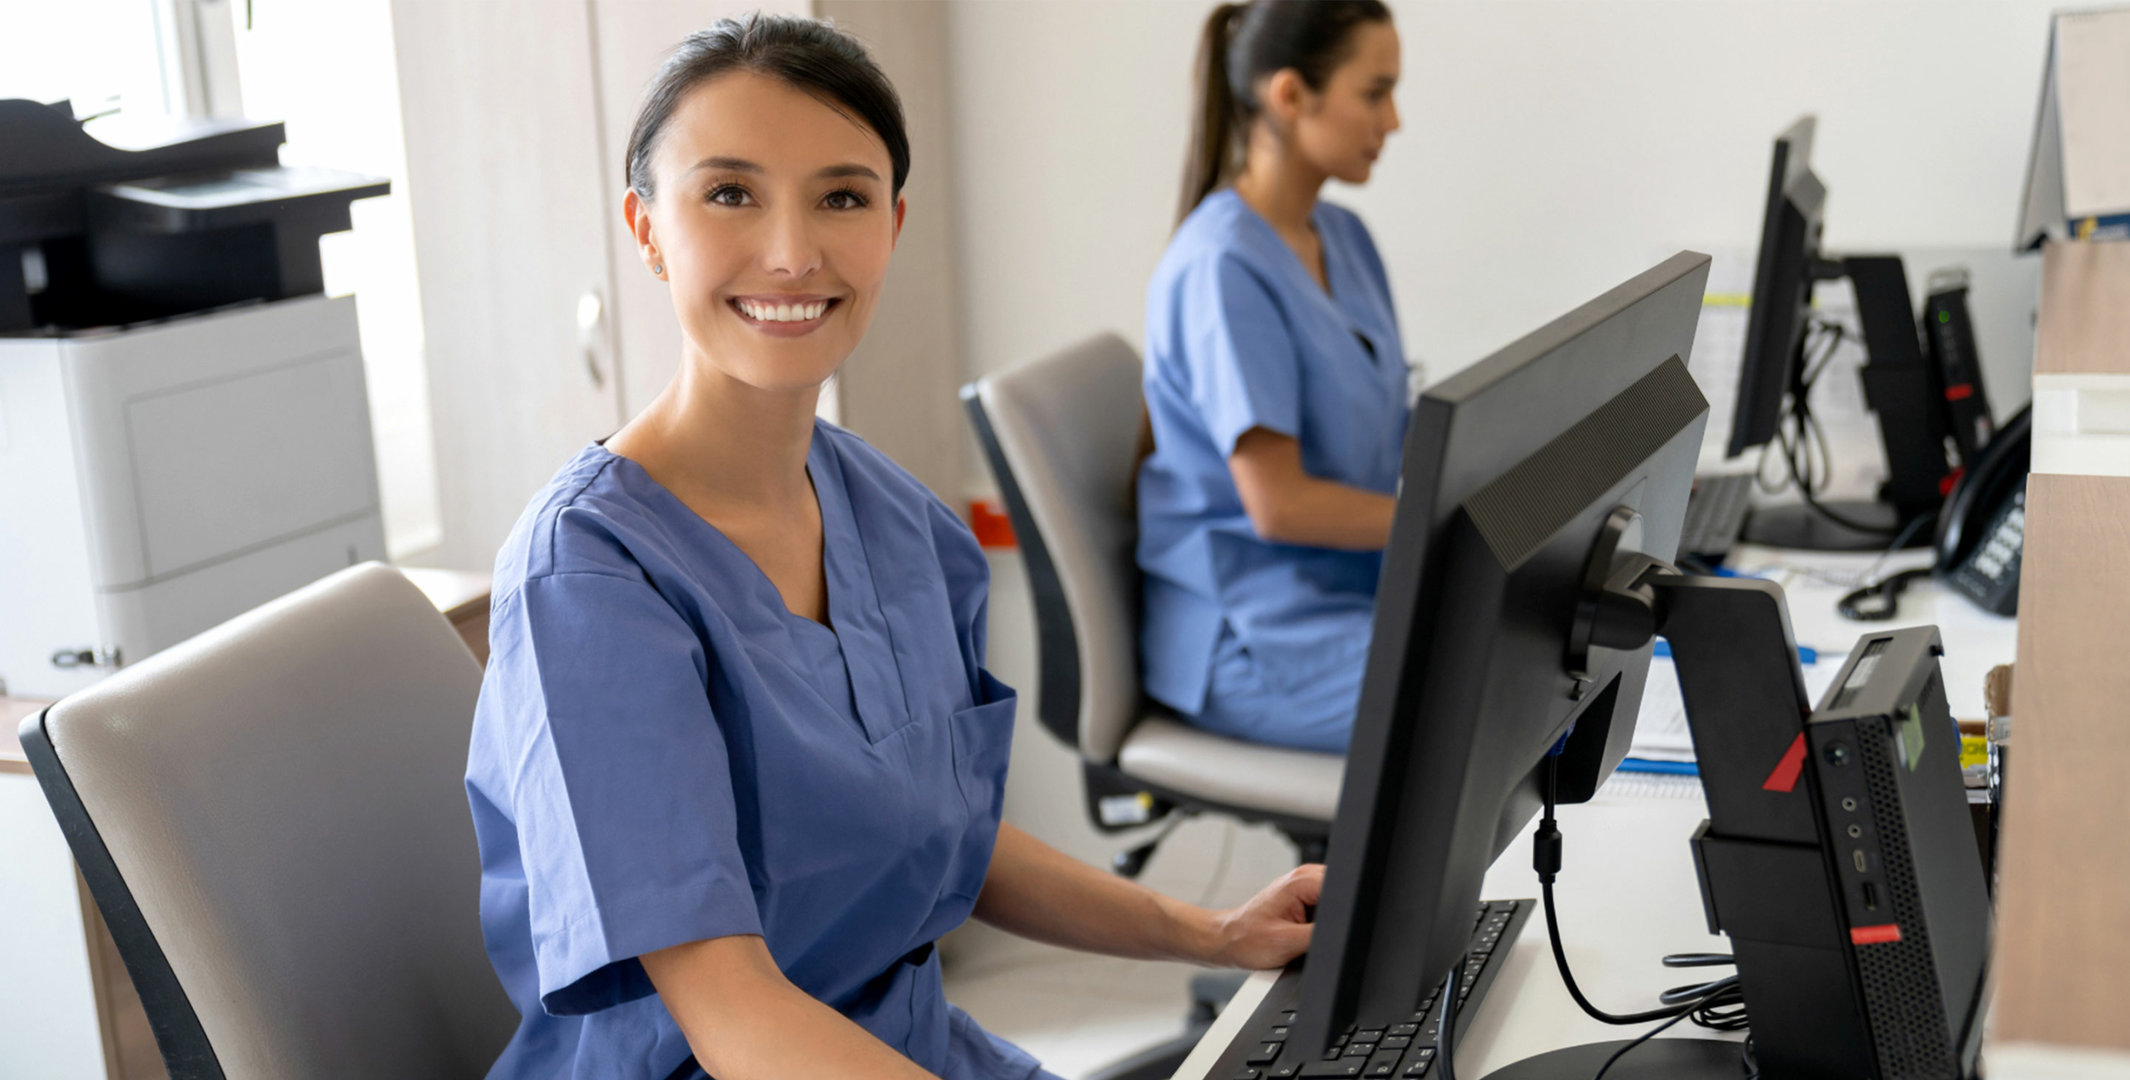 Medical Billing and Coding Undergraduate Certificate Hero Image of a Professional Woman Smiling behind Front Desk